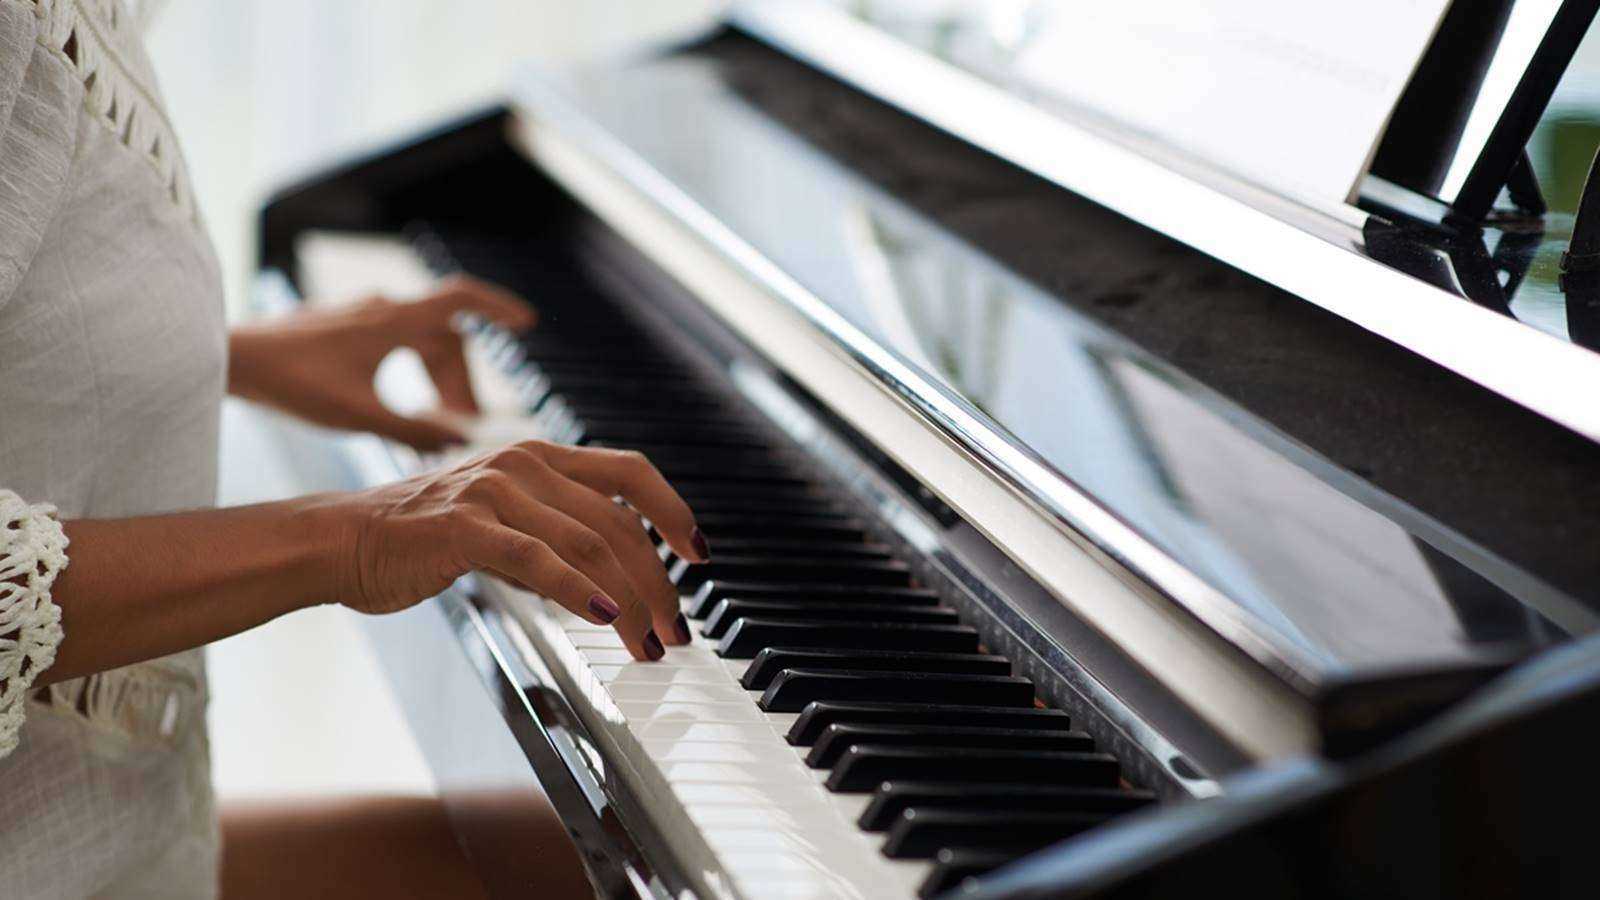 You Can Get a Digital Piano on a Payment Plan with Bad Credit